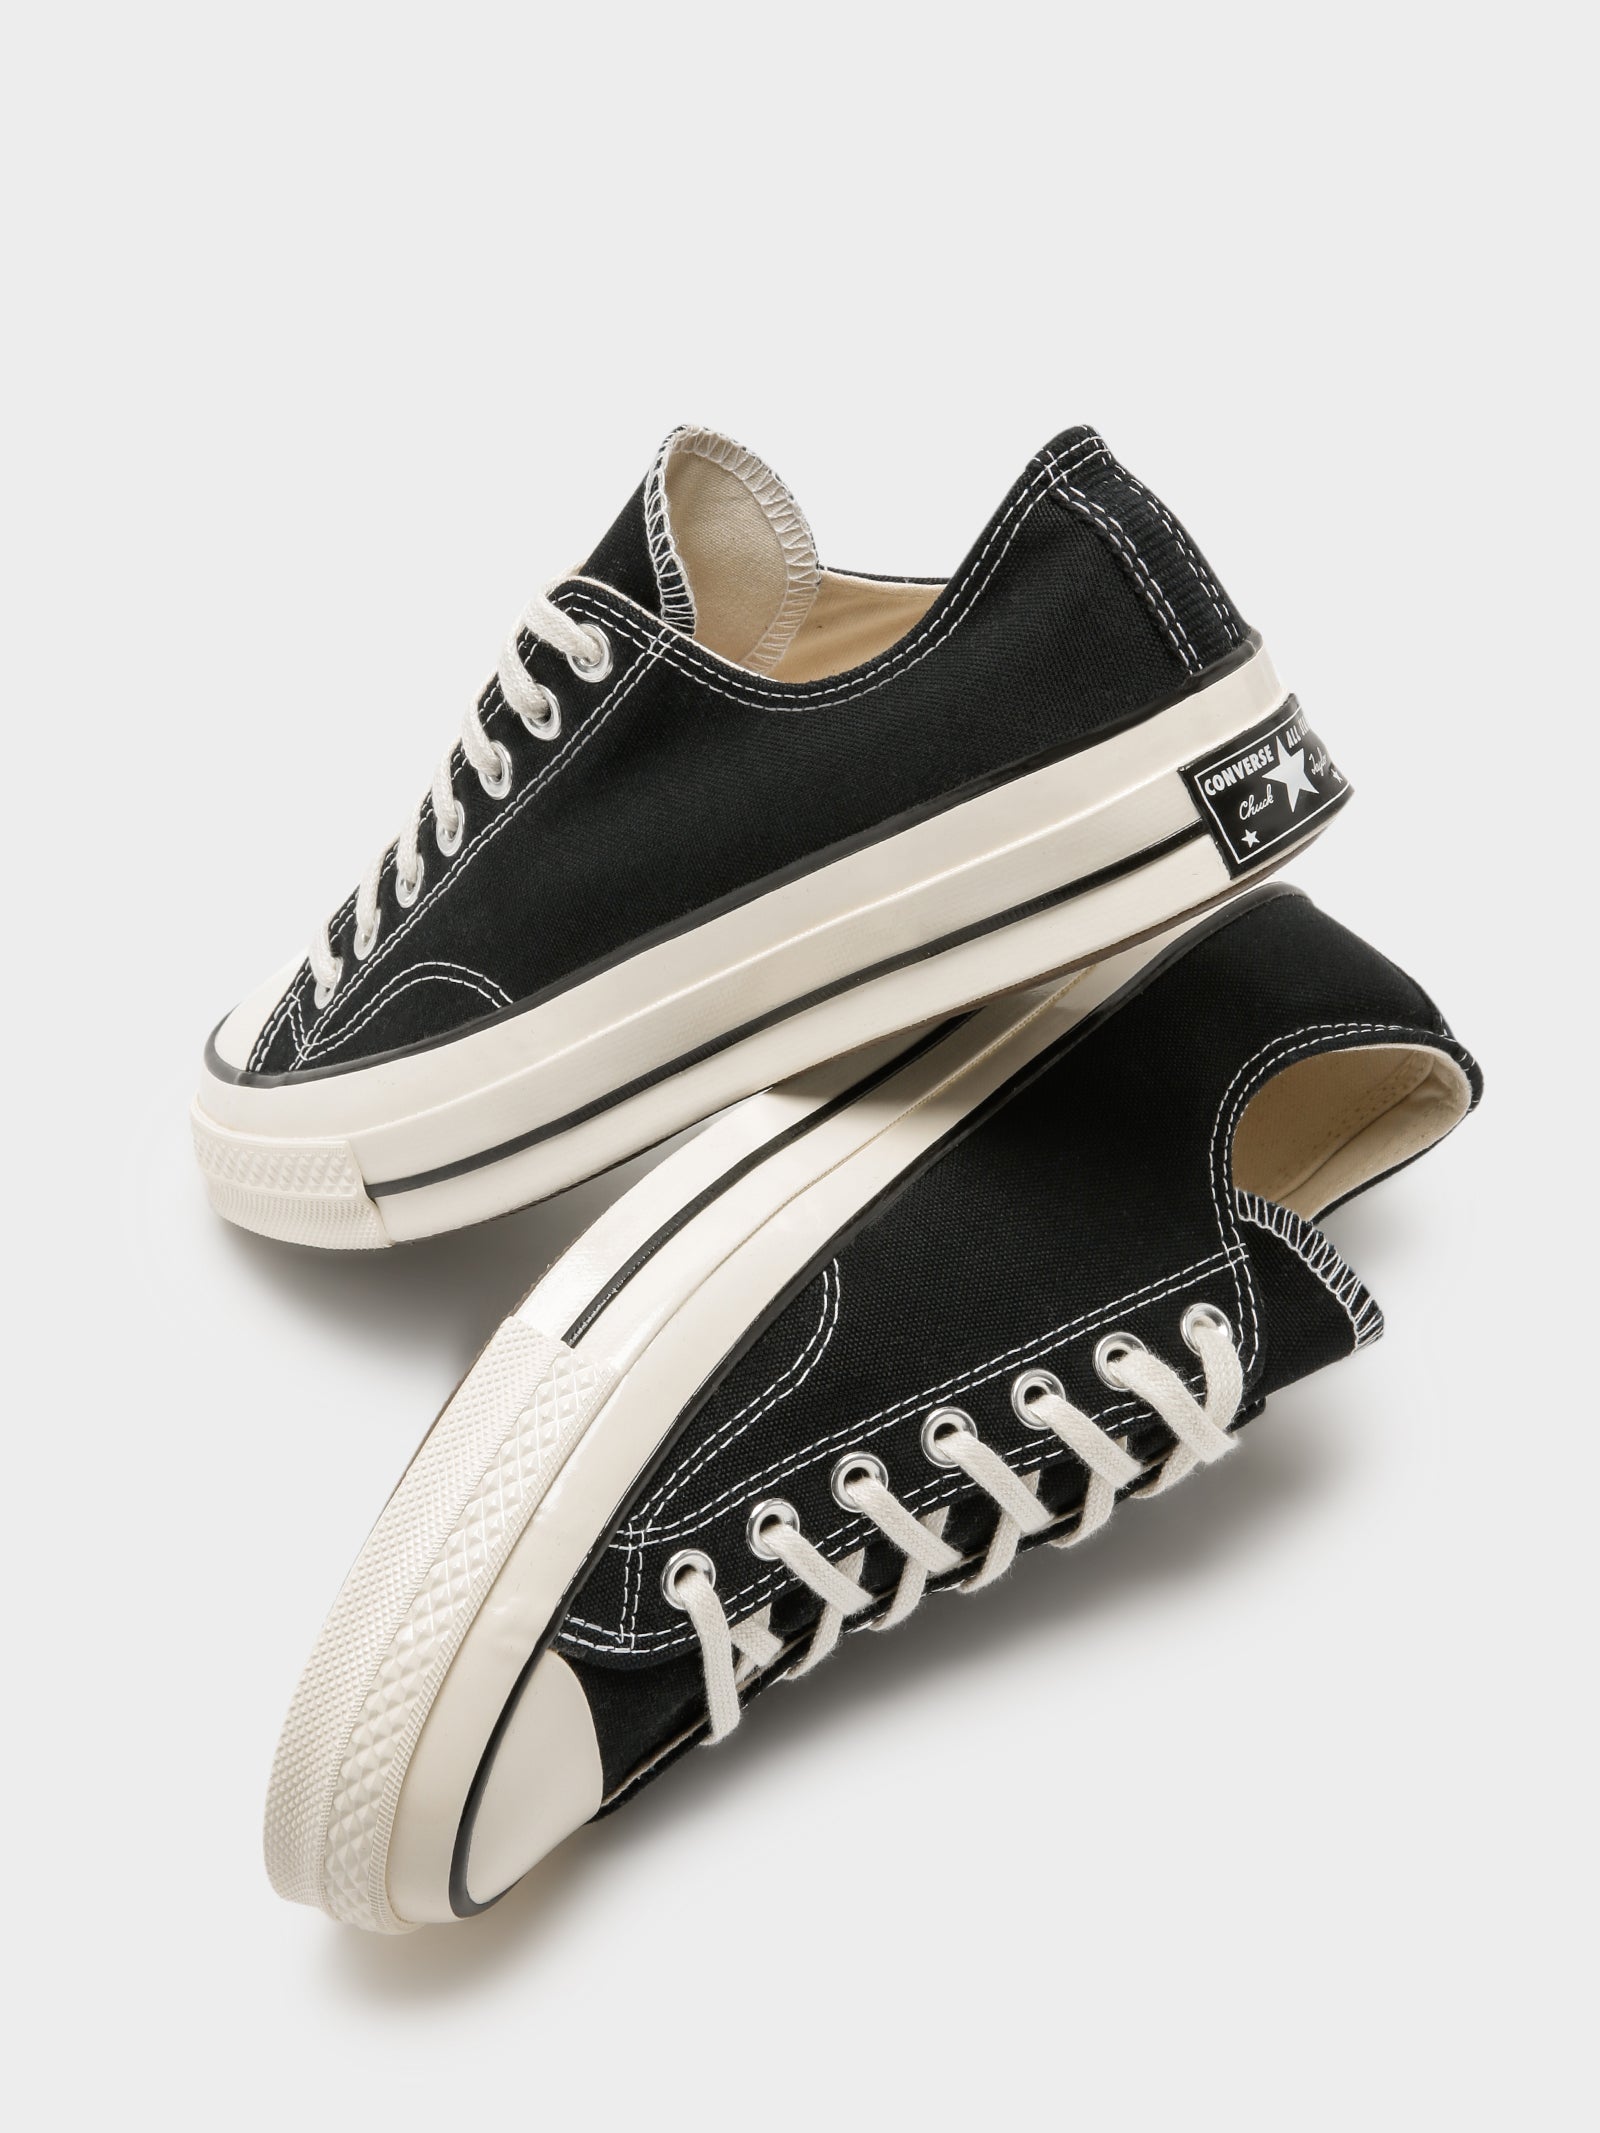 halt engagement Sanctuary Unisex Chuck Taylor All Star 70 Low Top Sneakers in Black - Glue Store